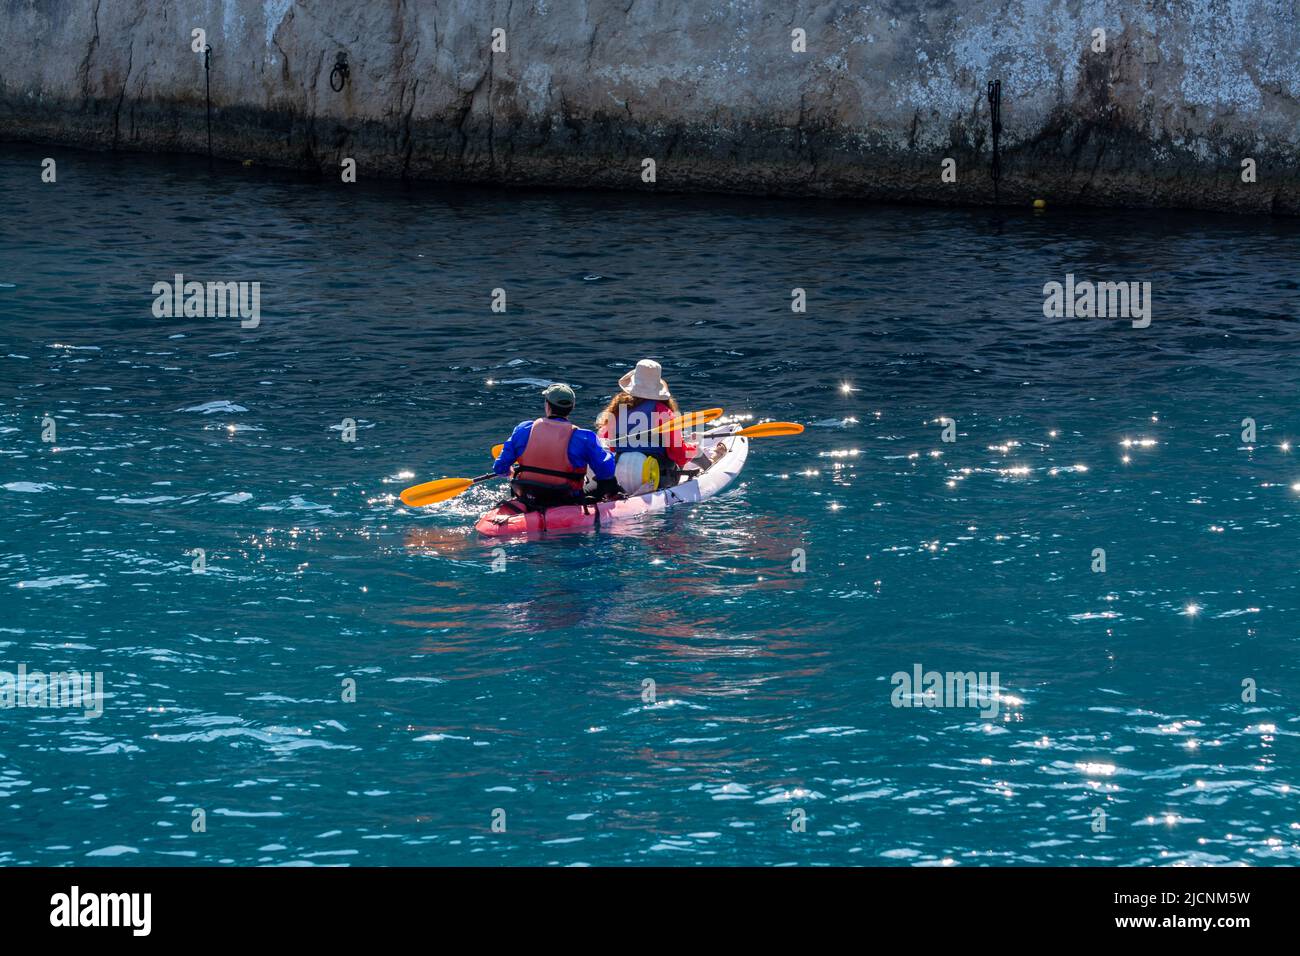 Unidentified two sporters in kayak is Calanque de Port-Miou near Cassis,  excursion to Calanques national park in Provence, France Stock Photo - Alamy